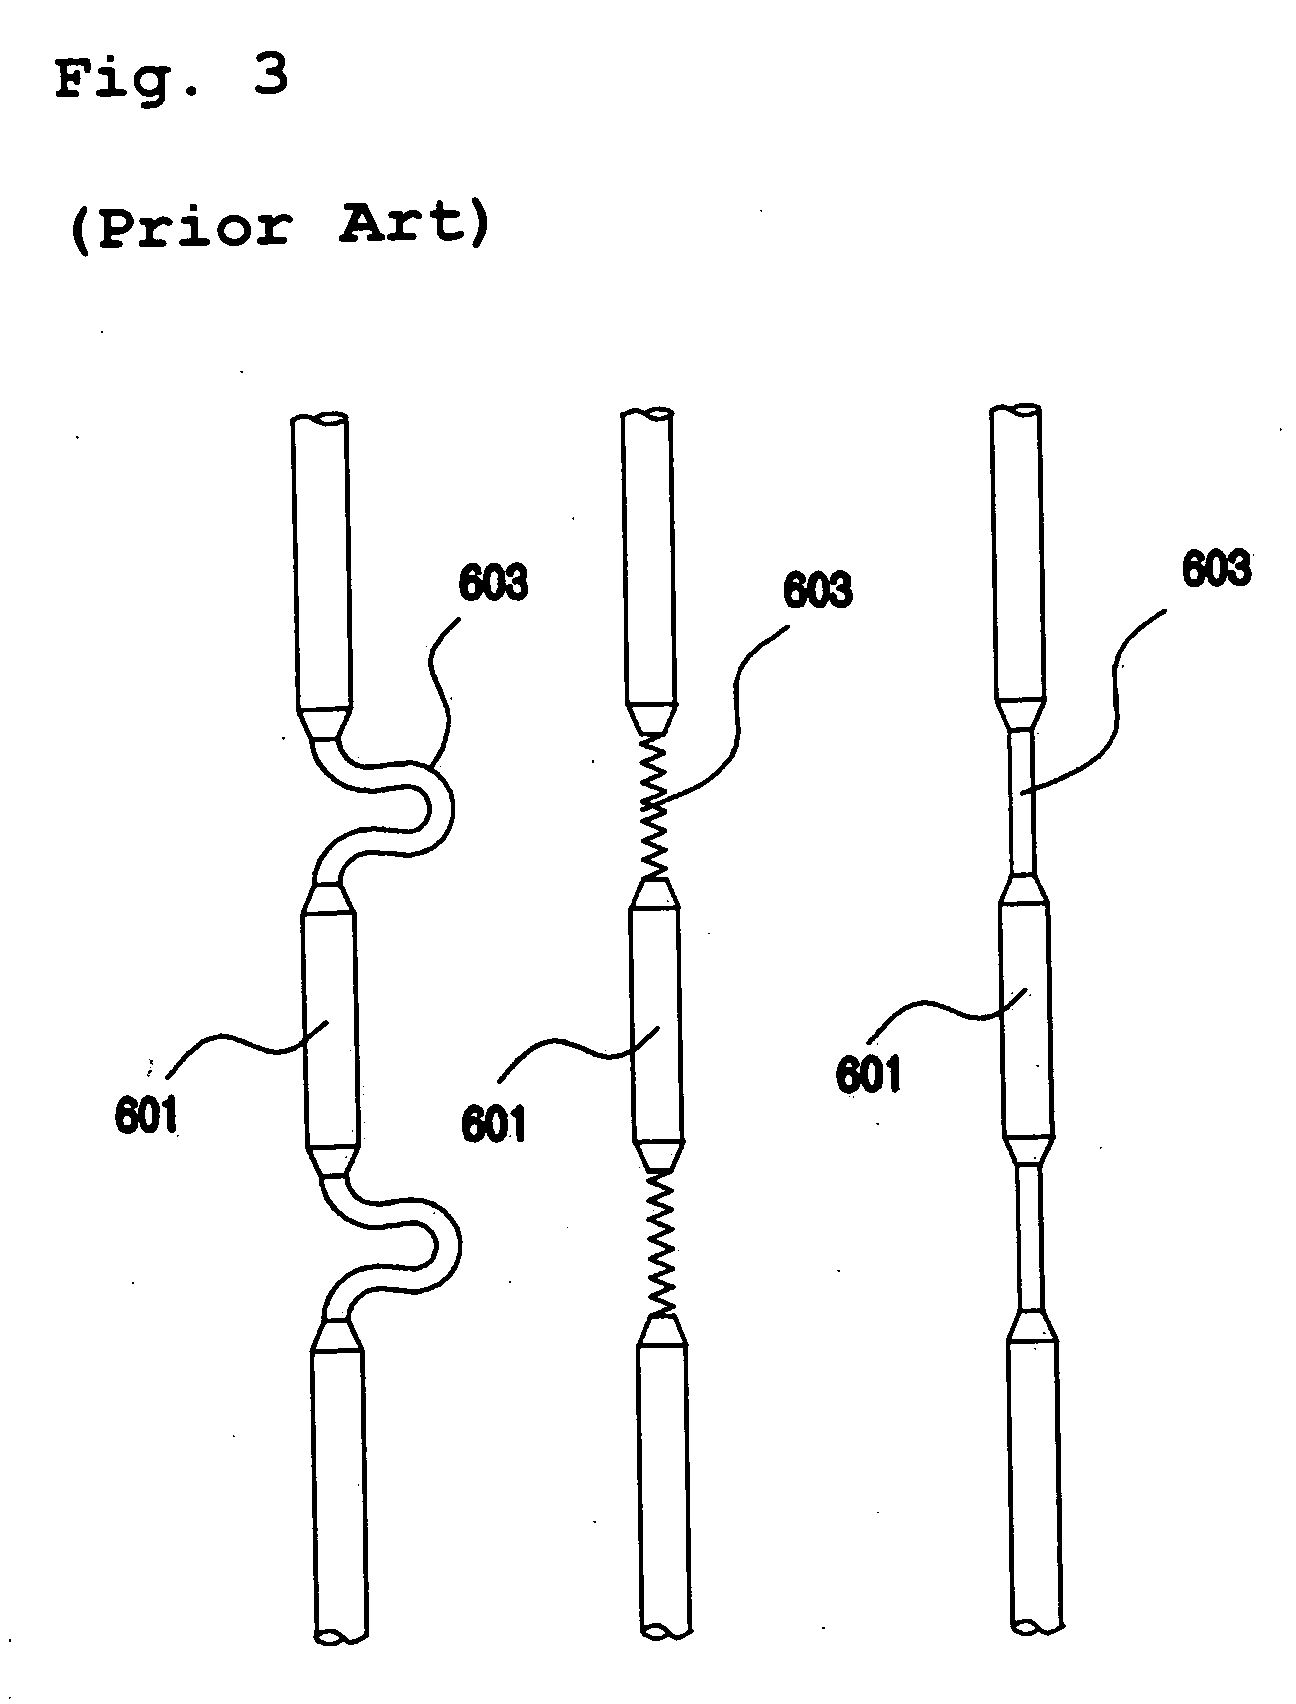 Bio-flexible spinal fixation apparatus with shape memory alloy